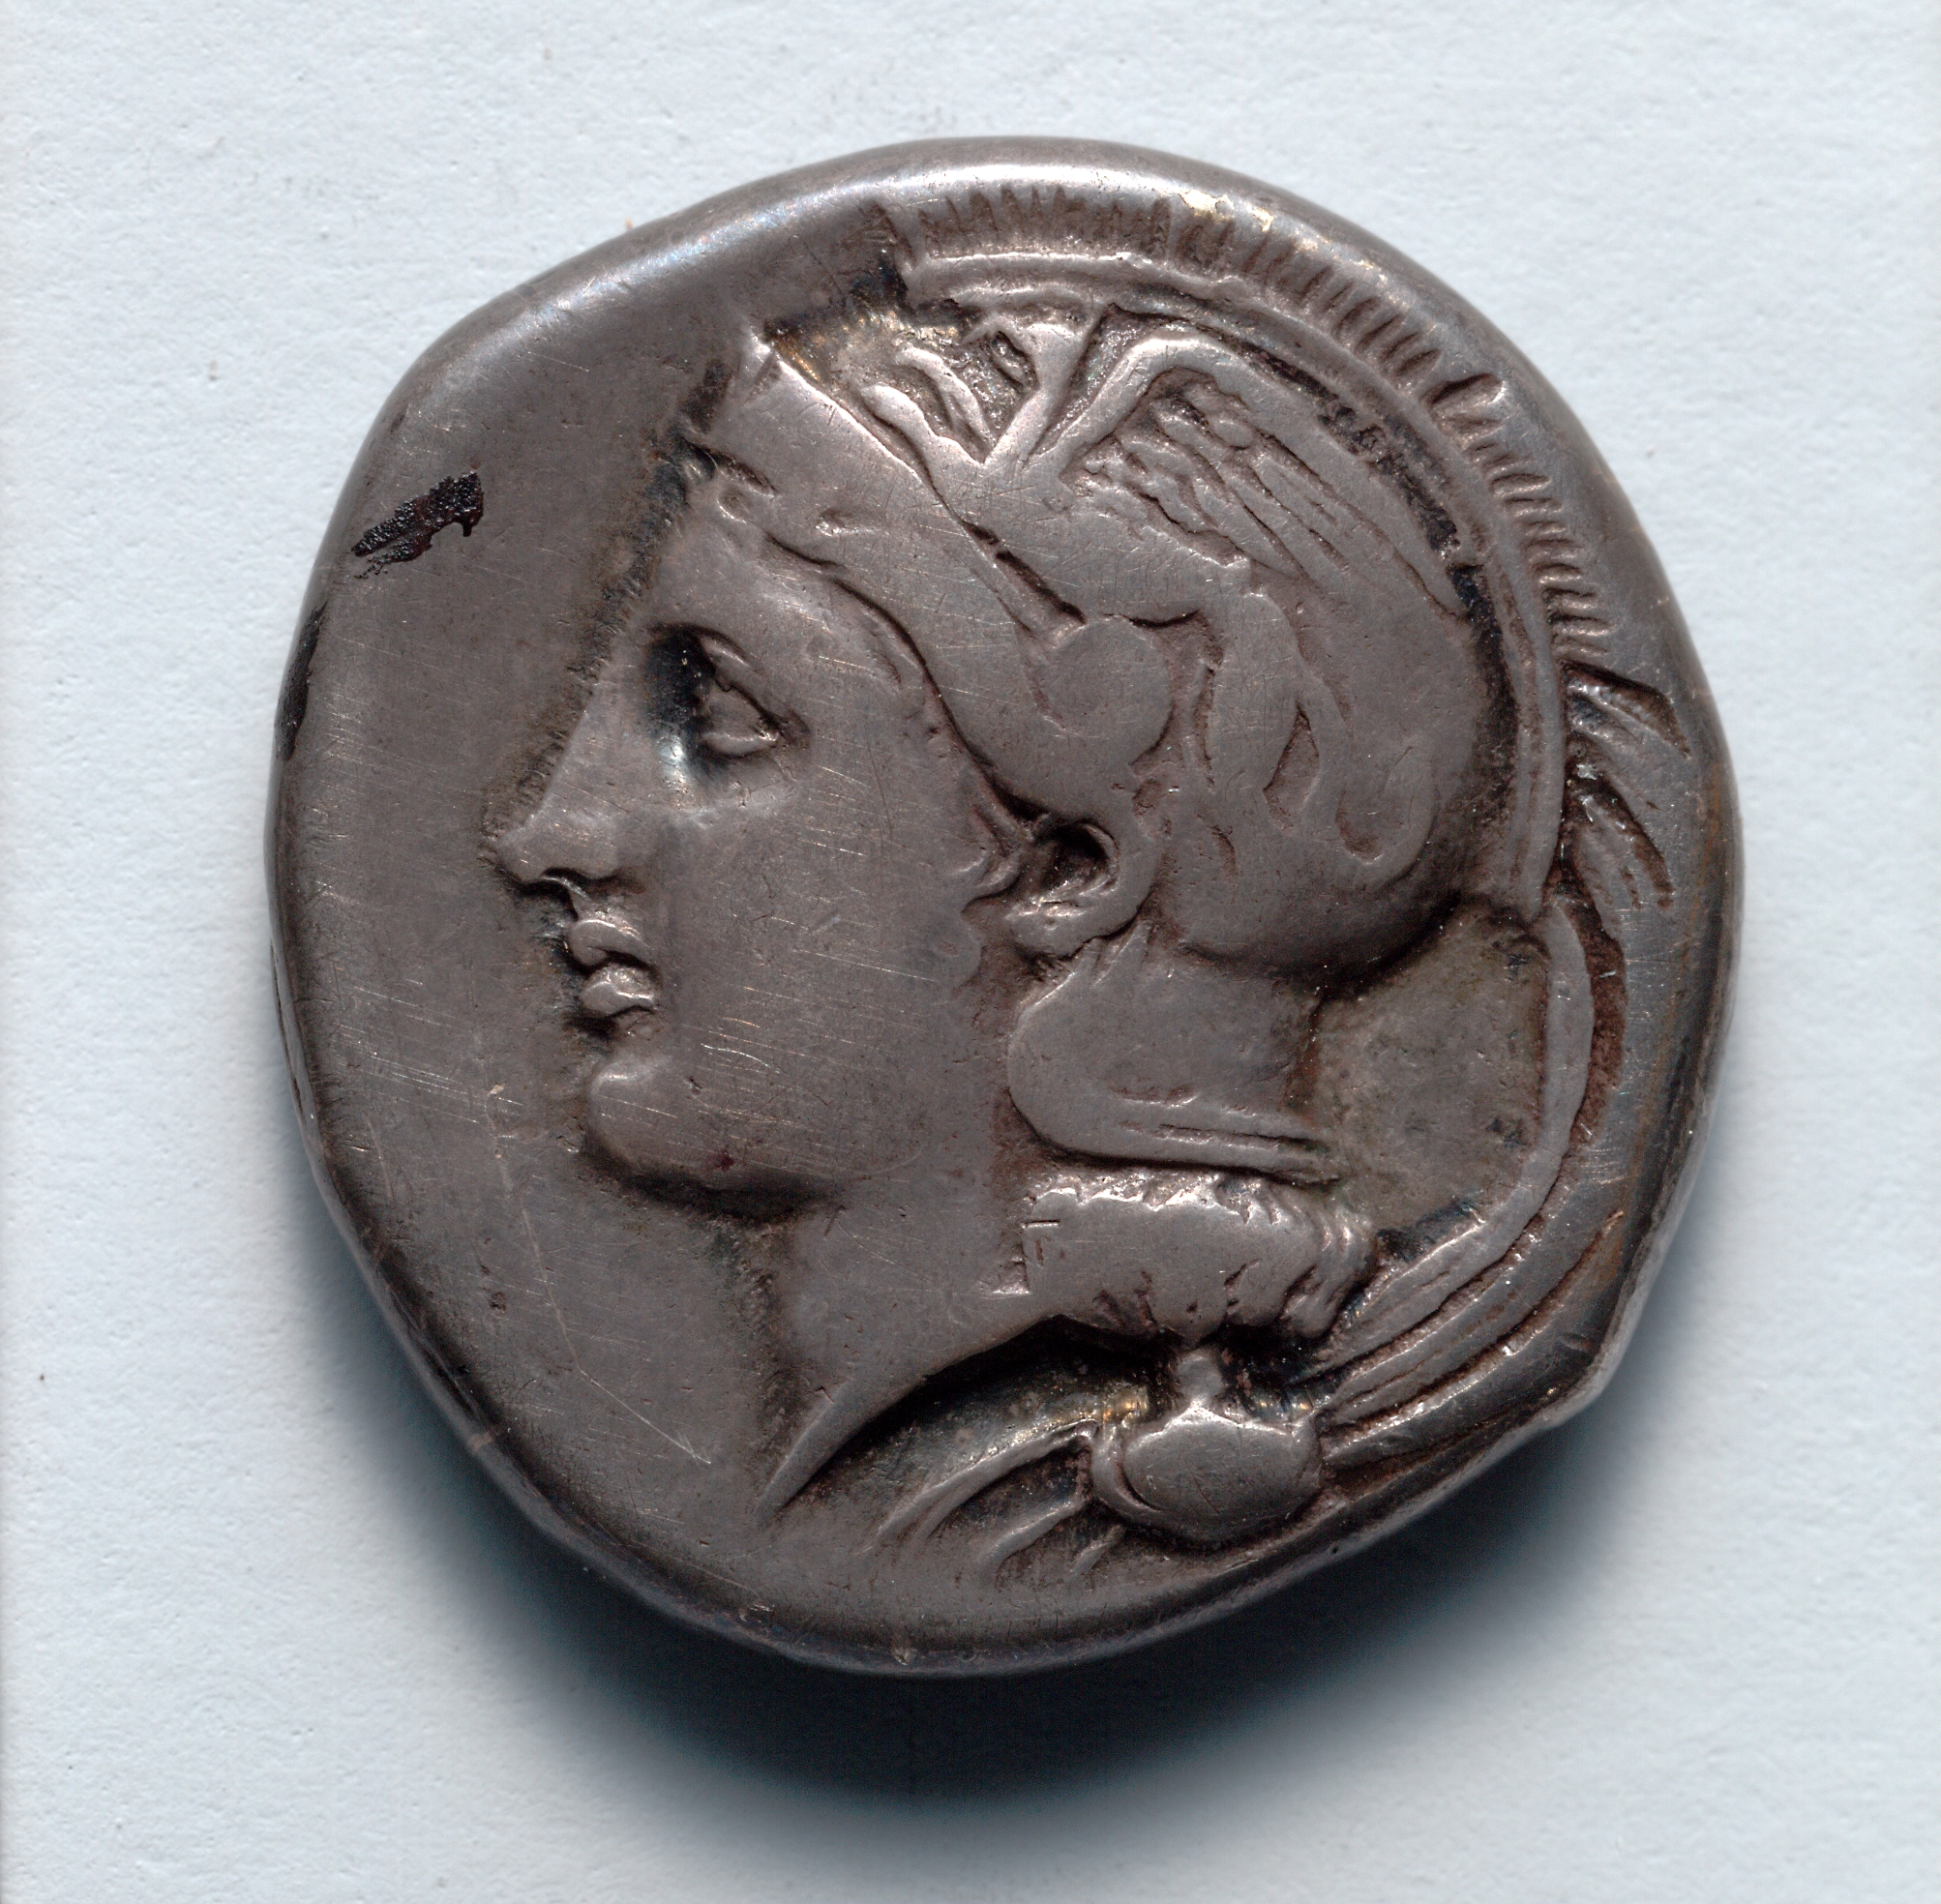 Stater: Head of Athena (obverse)